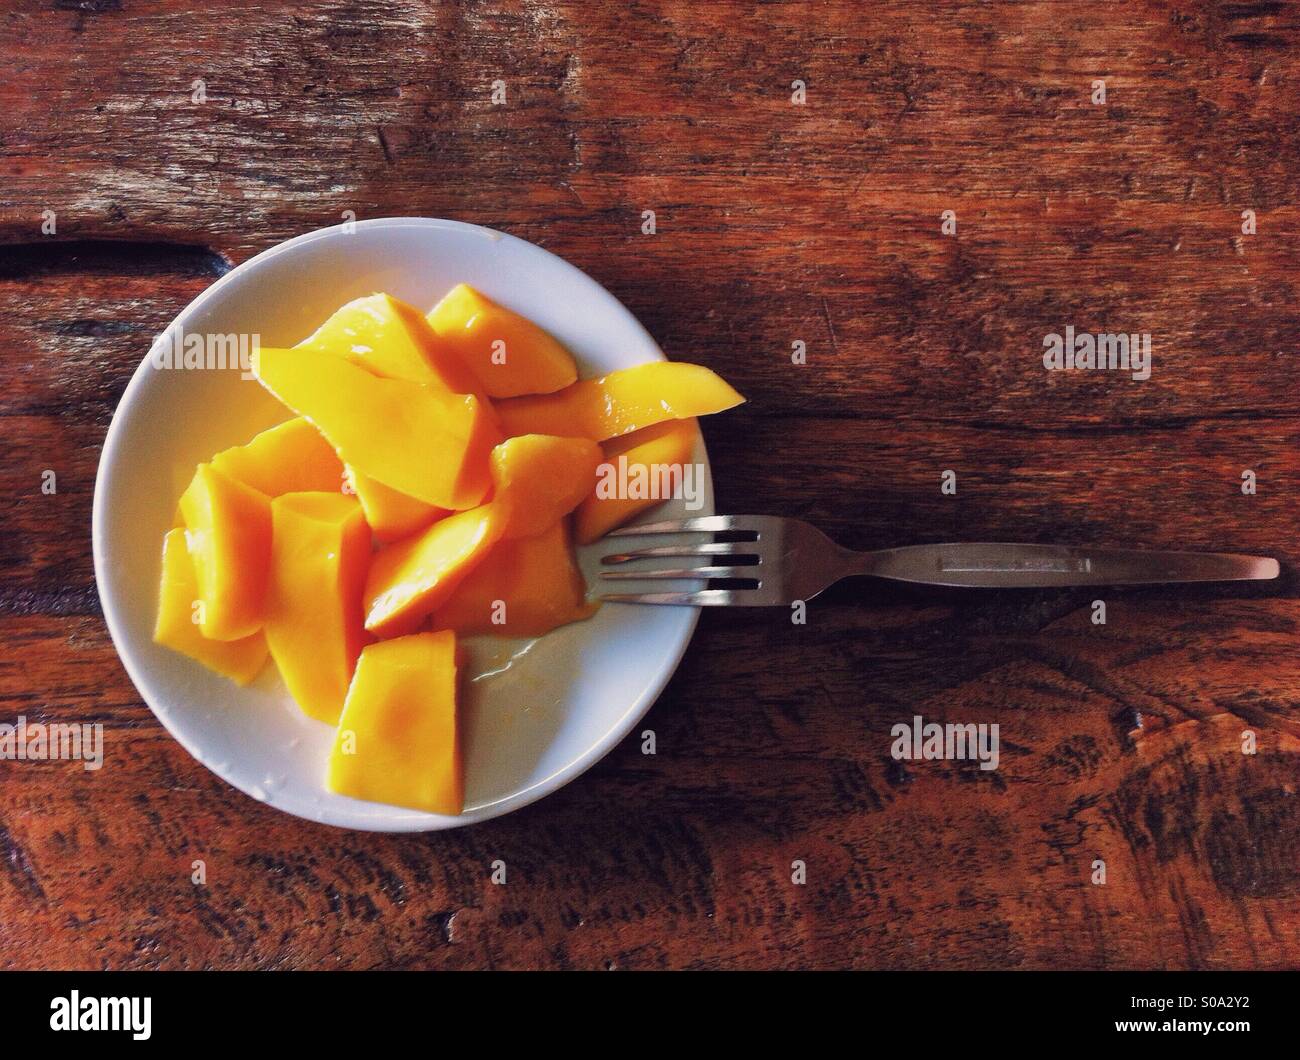 Pieces of yellow mango flesh on a white dish on distressed dark red wood table with metal fork Stock Photo